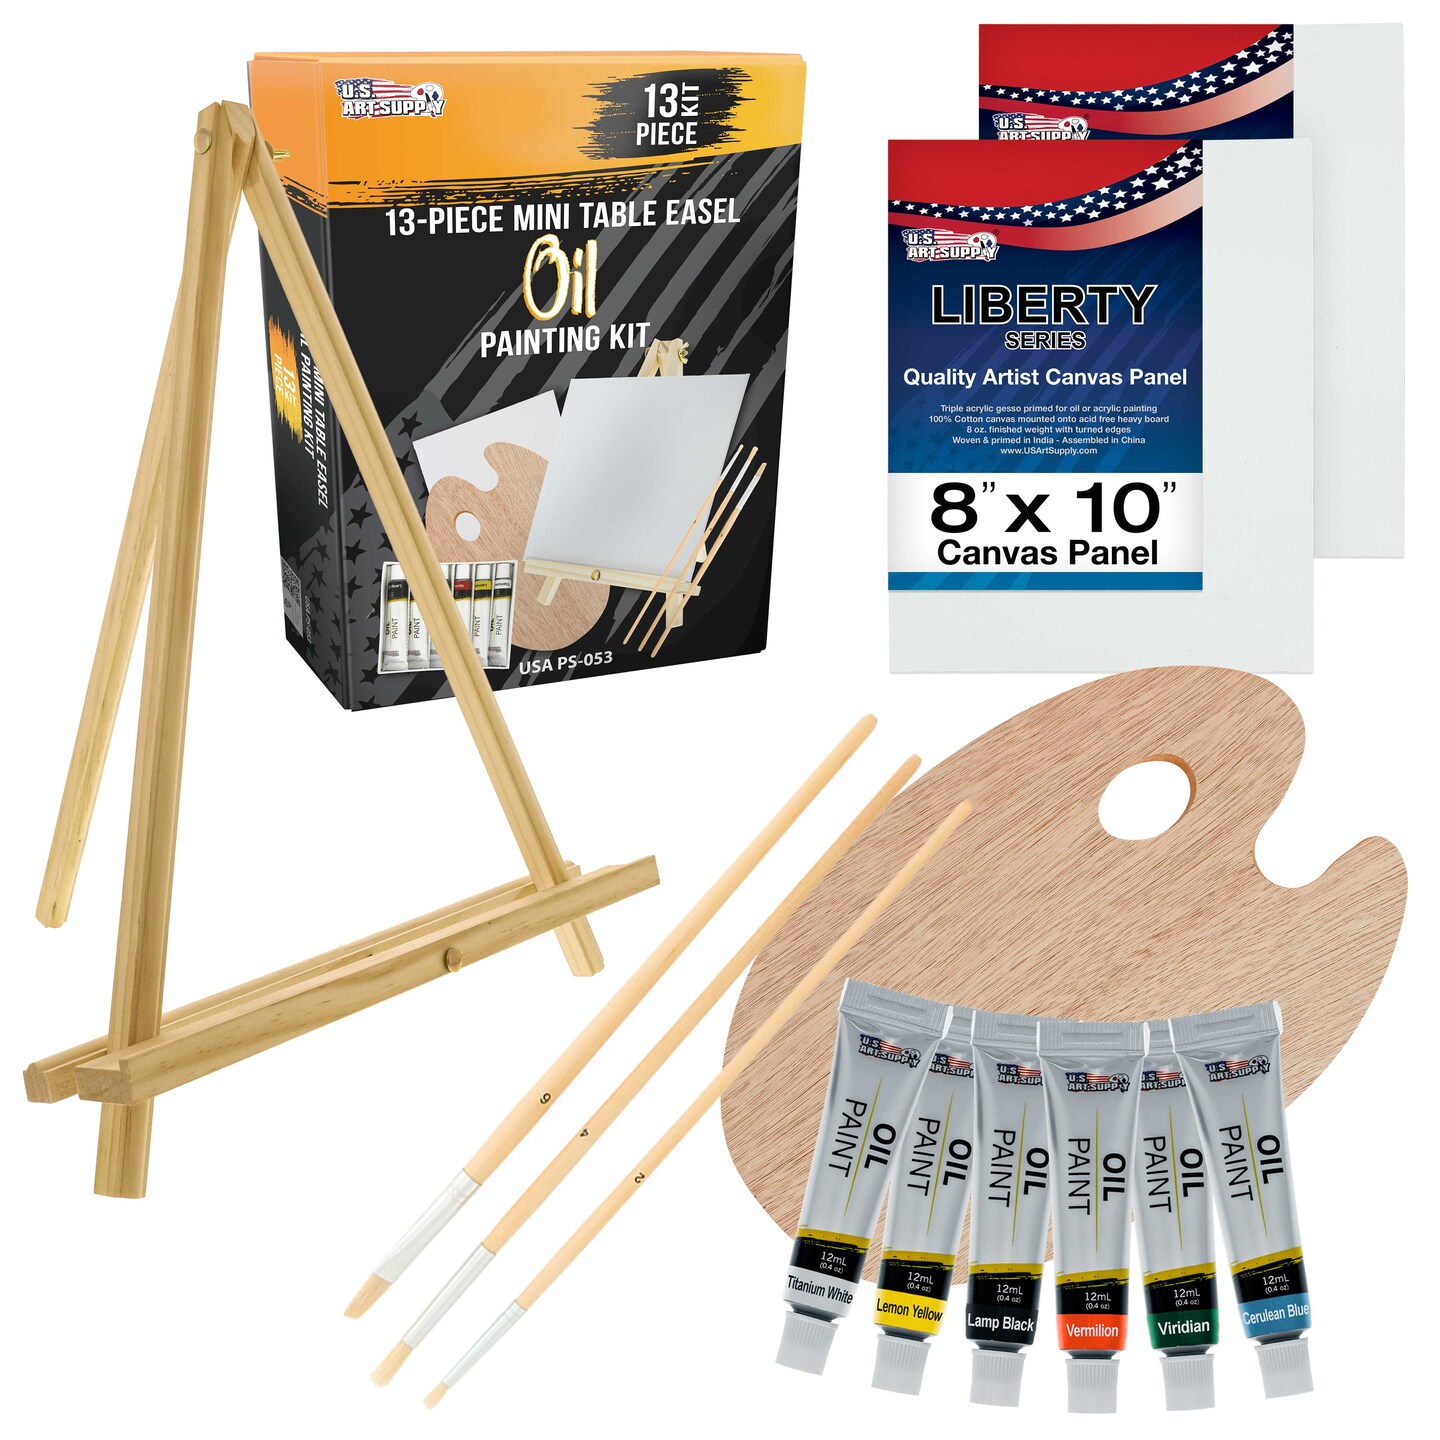 Martin Bob Ross Master Artist Oil Painting Set - A Deluxe Paint Set To  Paint Like Bob Ross With Paint, Brushes, and Palette Knife - [Master Set]